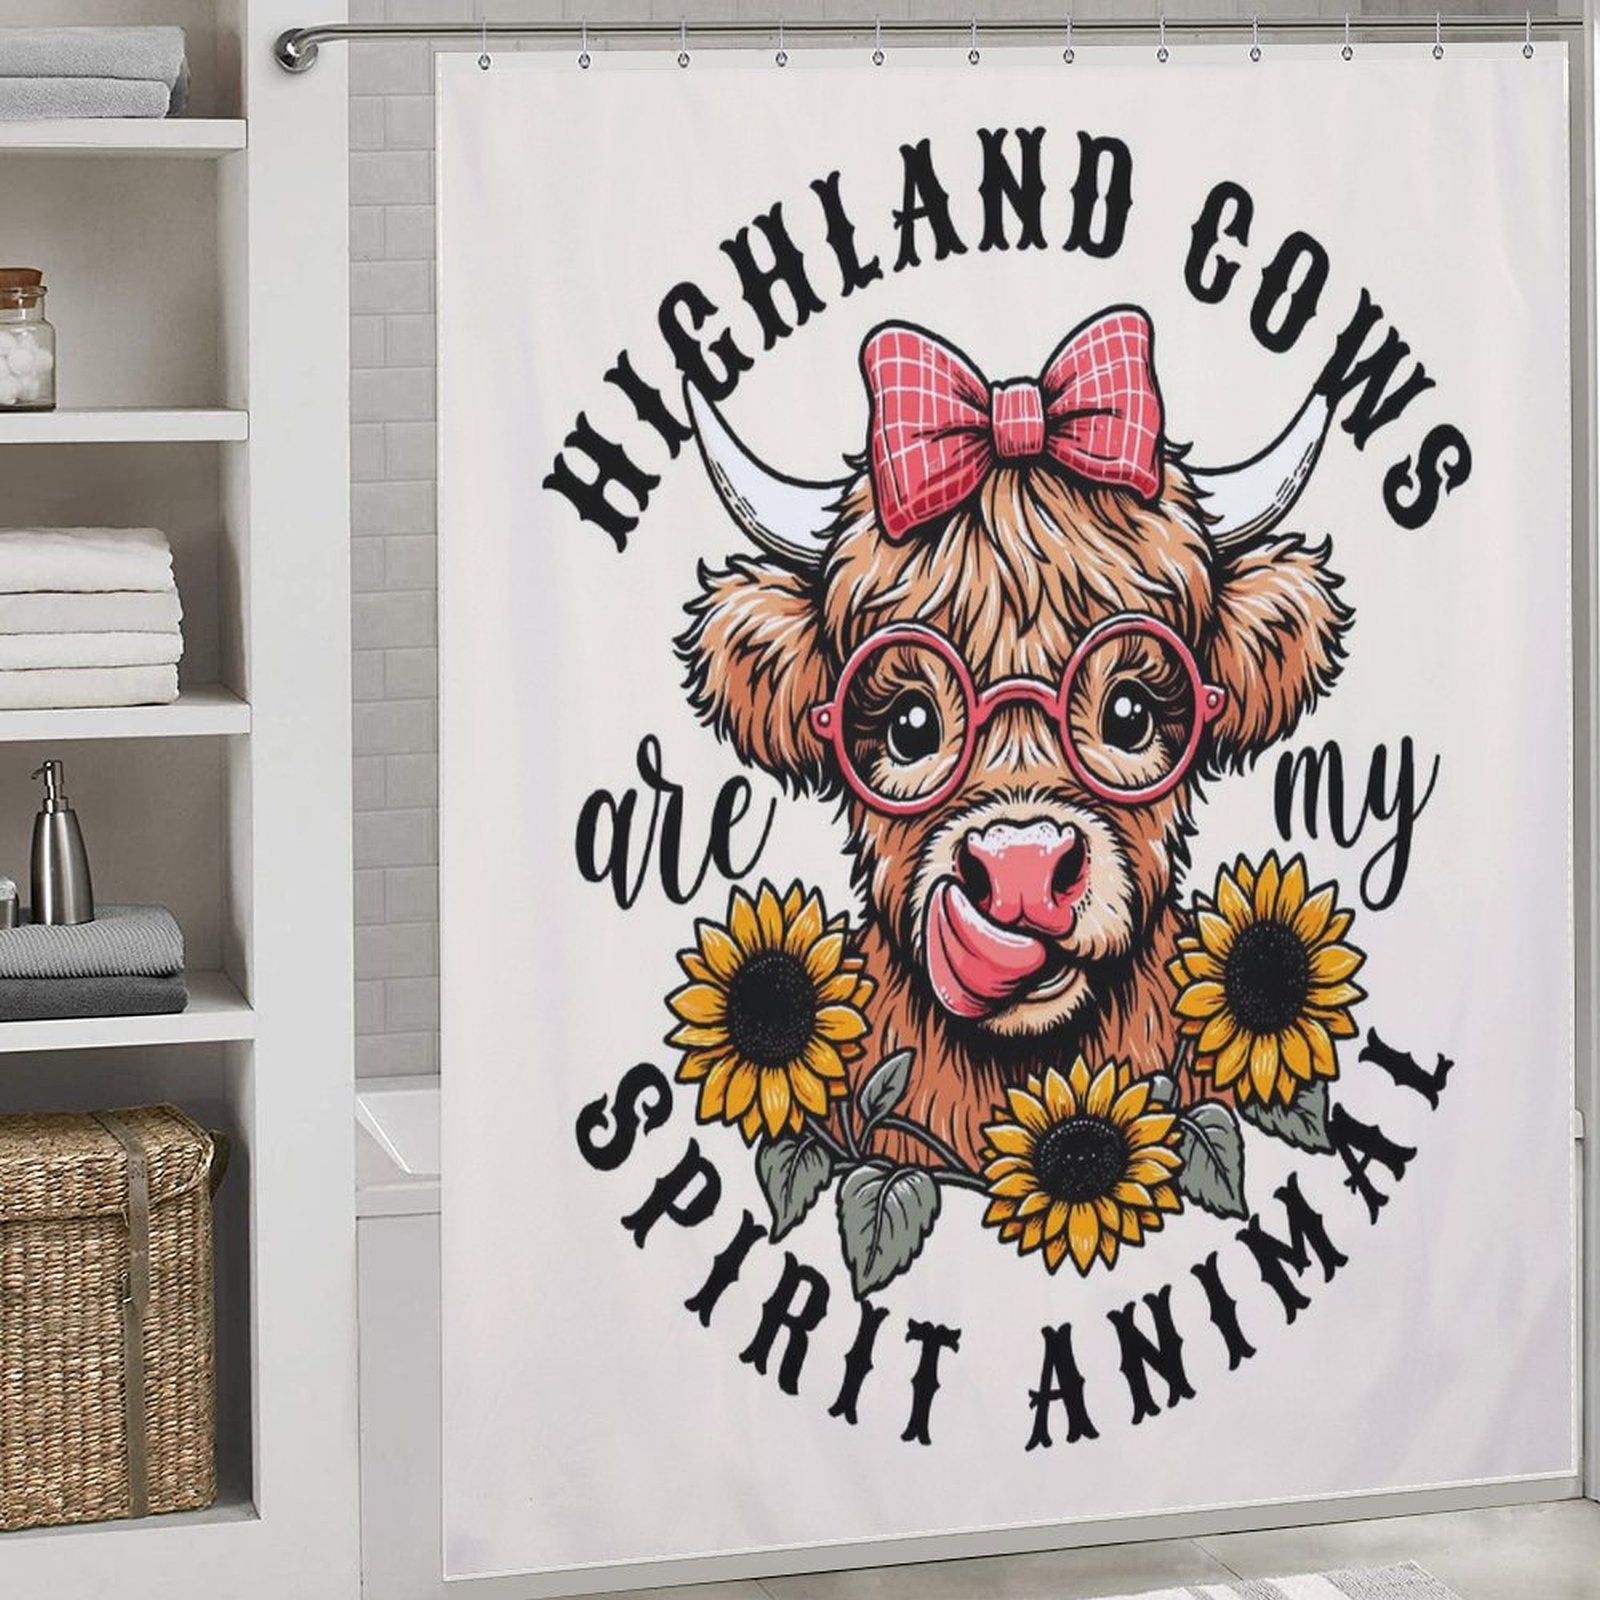 This whimsical bathroom decor features the Cute Sunflower Glasses Highland Cow Shower Curtain-Cottoncat by Cotton Cat with a printed design of a cartoon cow wearing sunflower glasses and a bow. The text reads, "Highland cows are my spirit animal," surrounded by vibrant sunflowers.